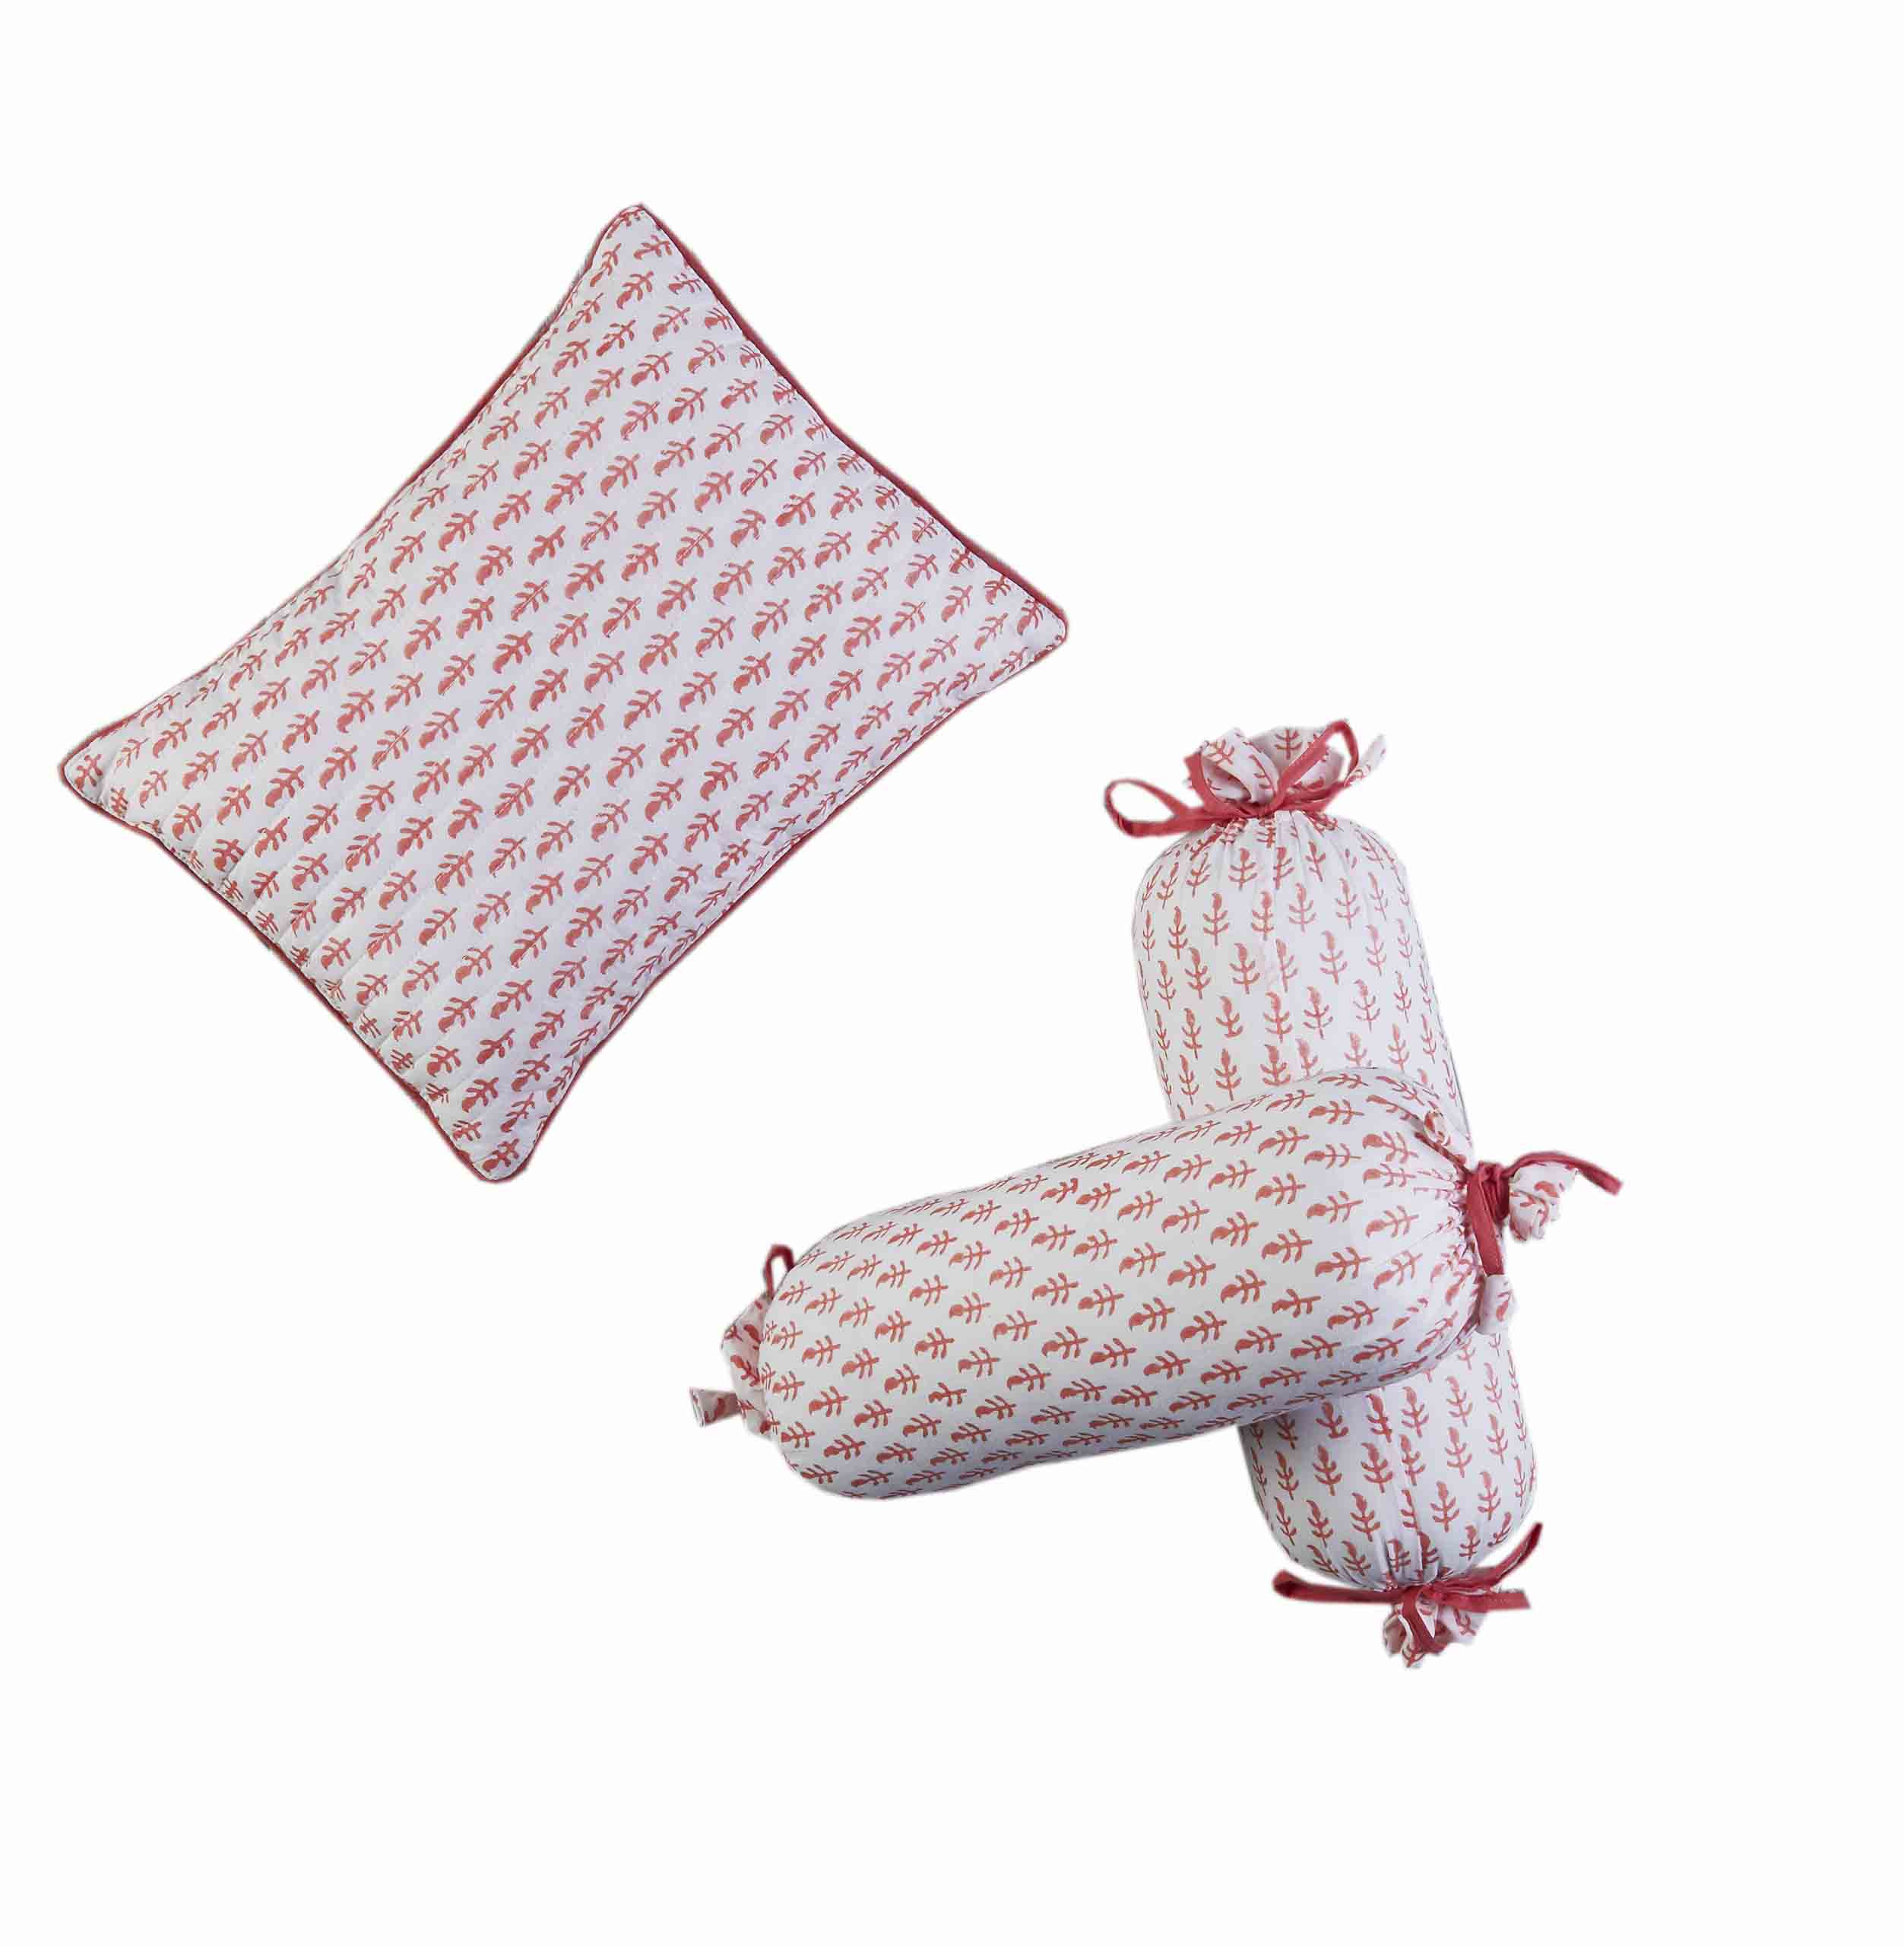 Must Have New Baby Nursery Cushion Set